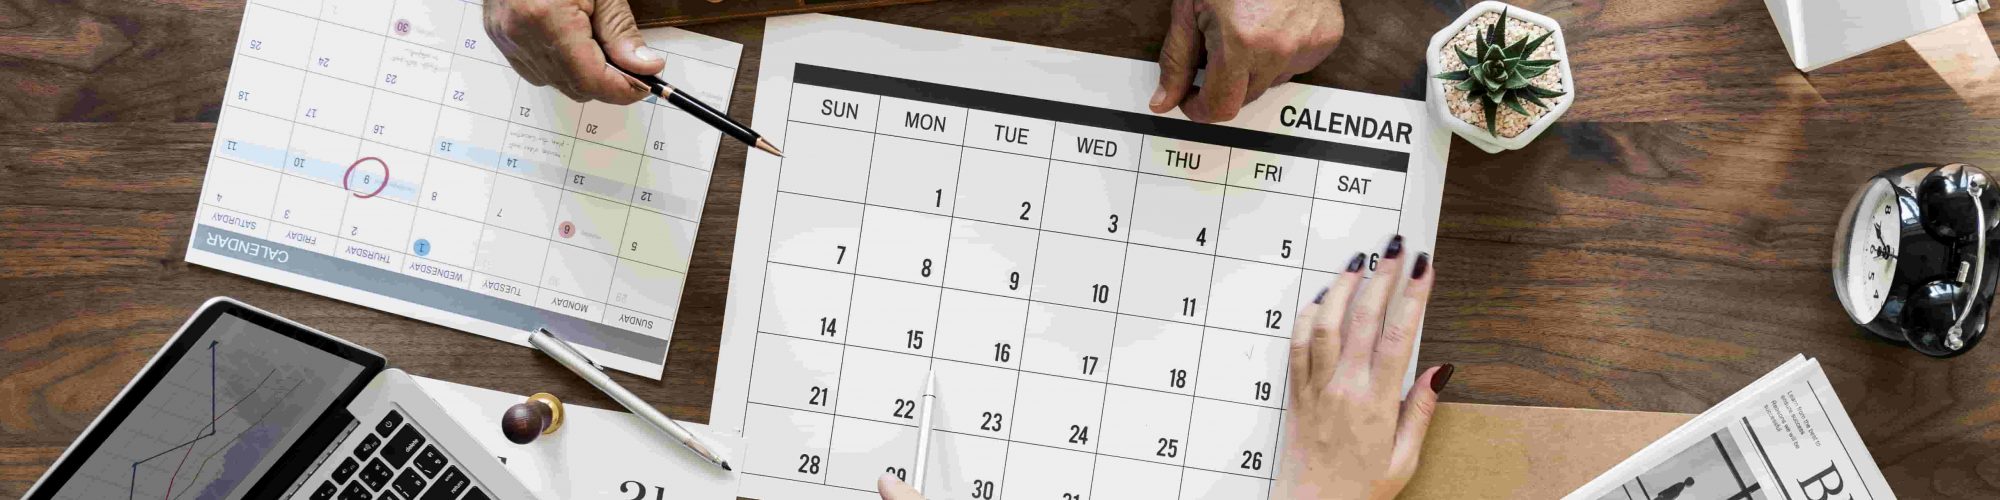 The 10 best Acuity Scheduling alternatives